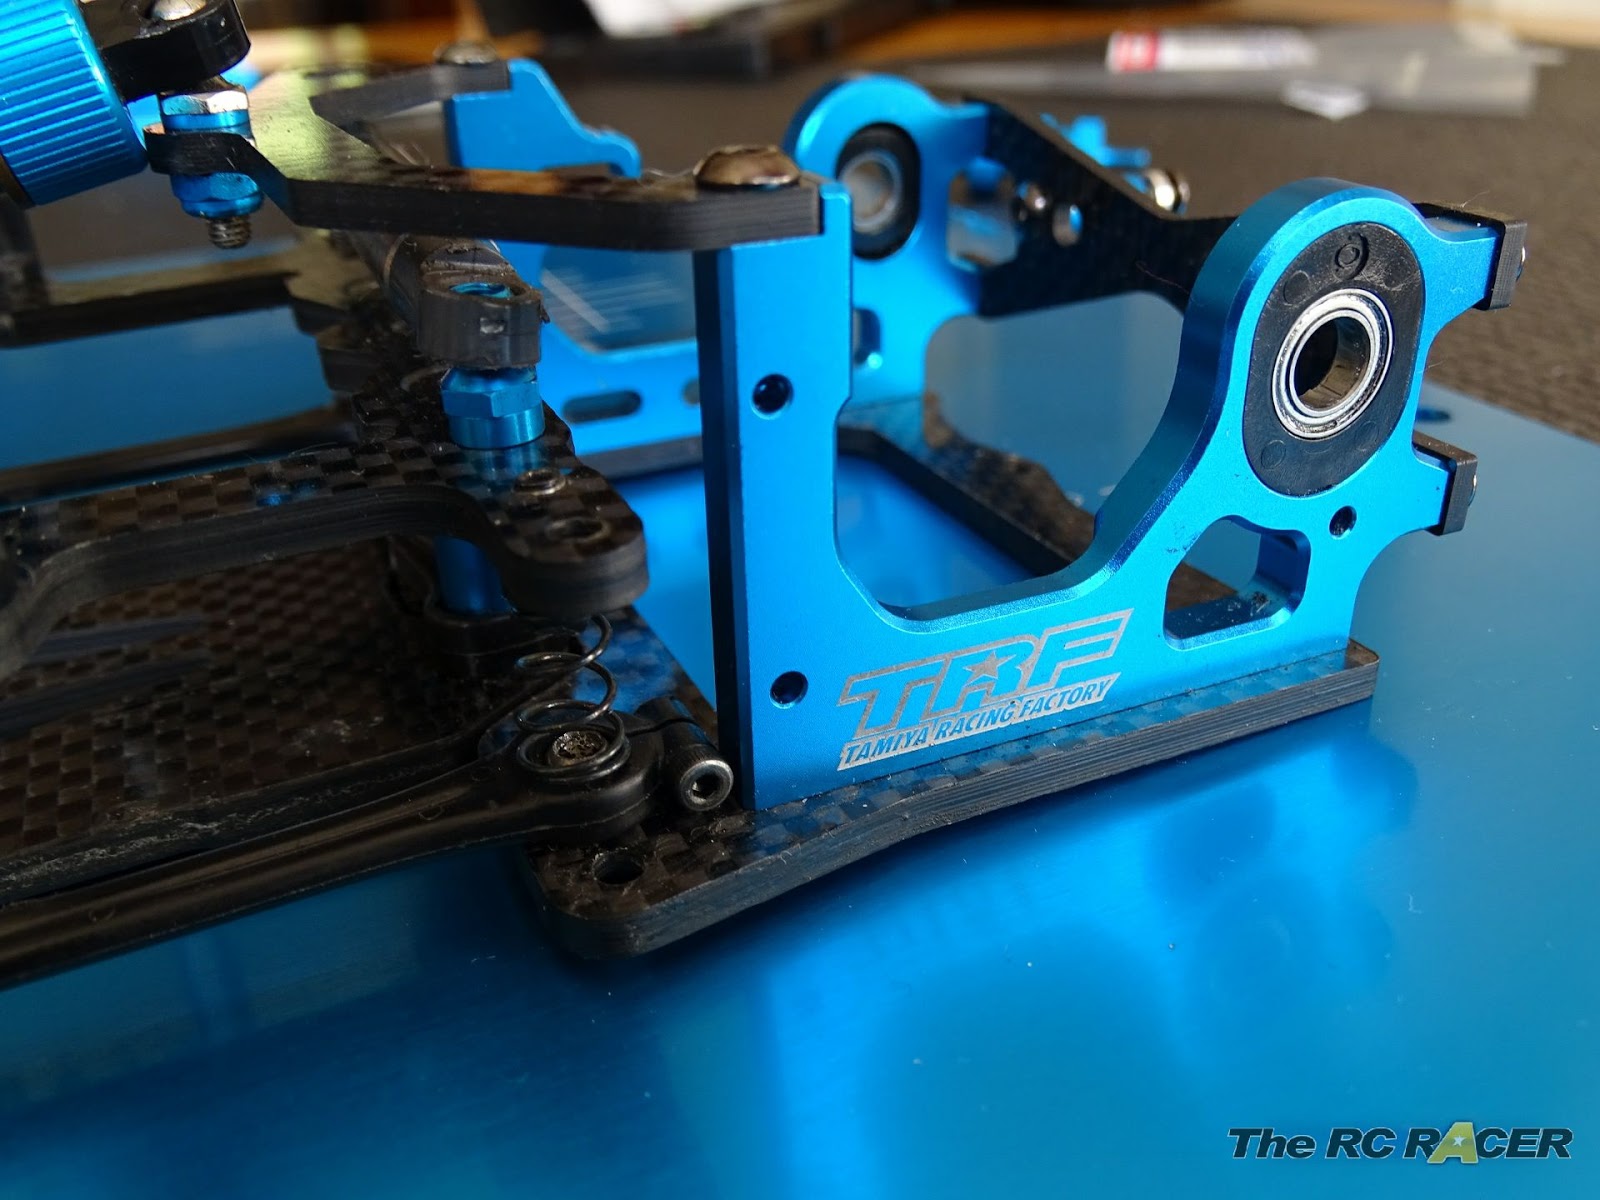 42252 Tamiya TRF101 closer look and Review | The RC Racer